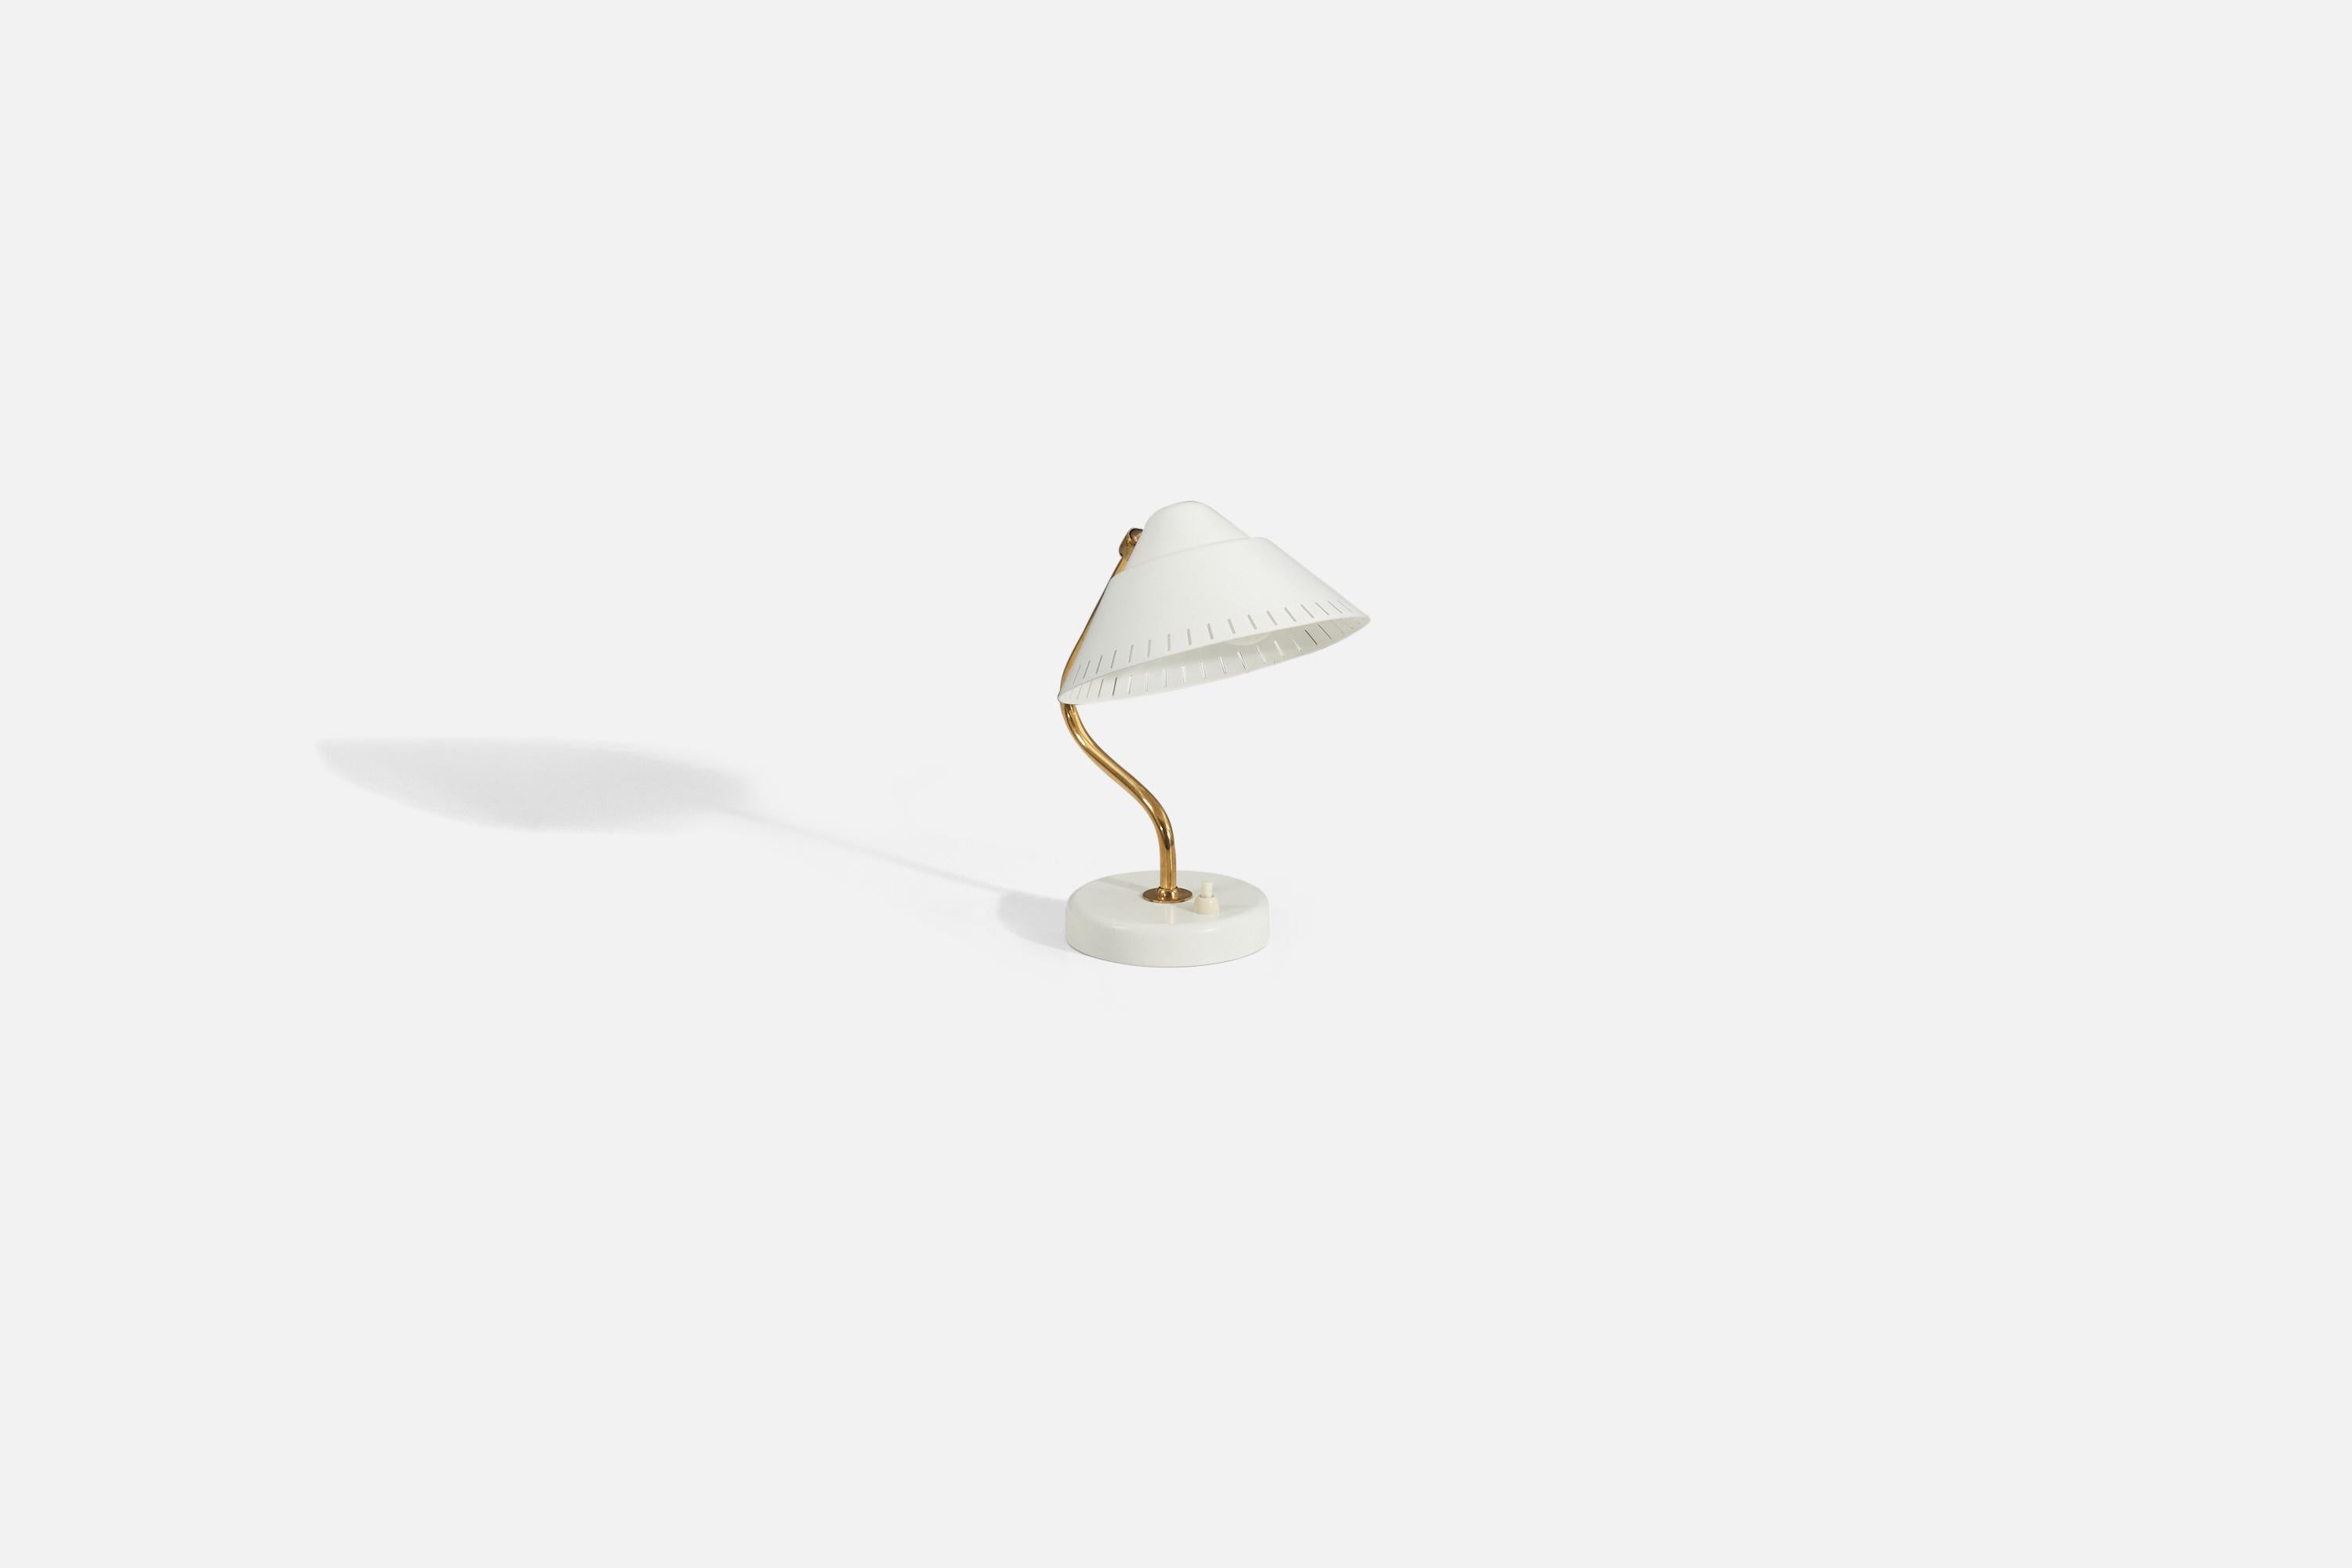 Mid-20th Century ASEA, Adjustable Table Lamp, Brass, White-Lacquered Metal, Sweden, 1950s For Sale